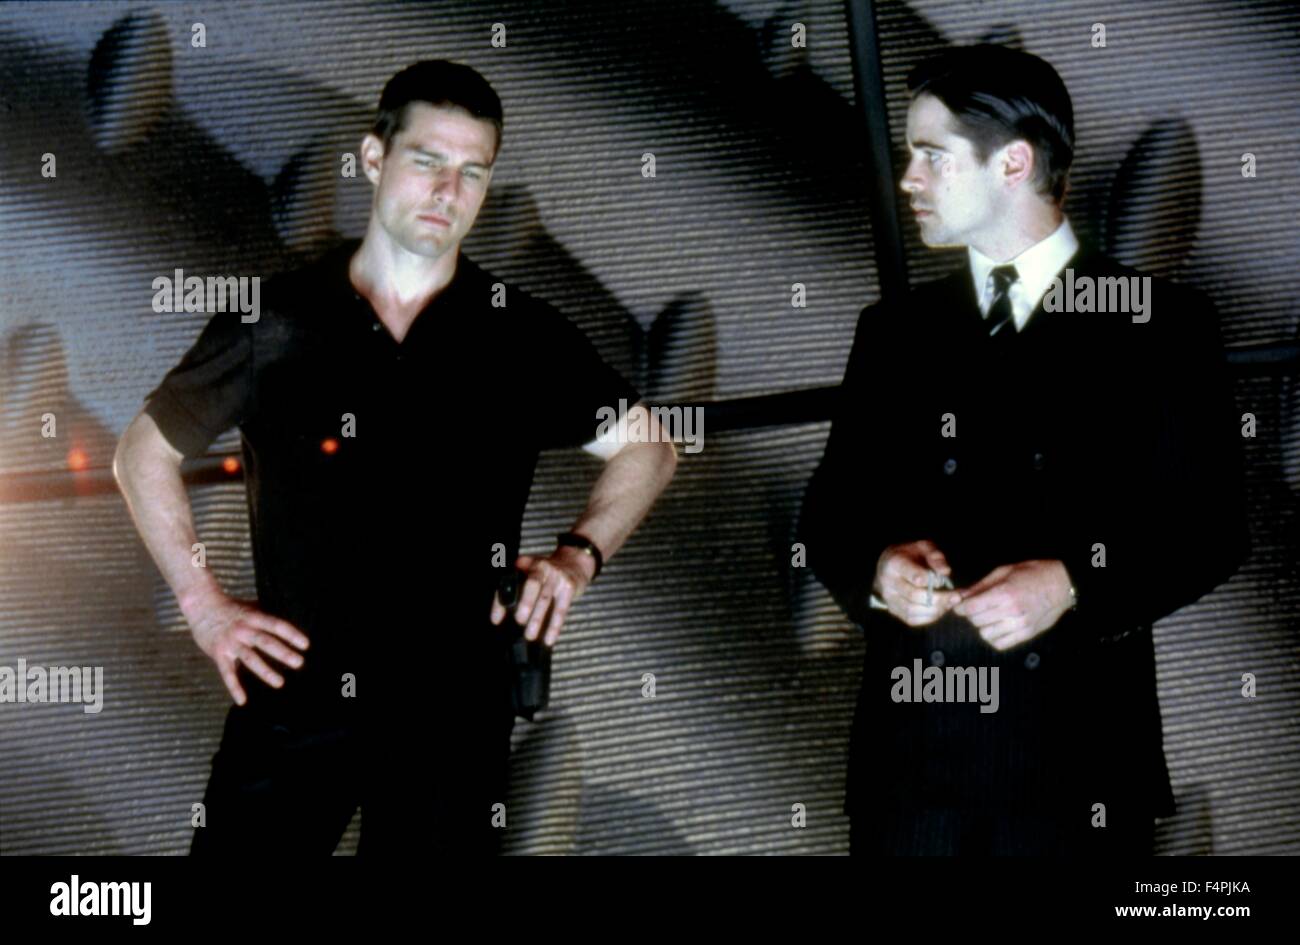 Tom Cruise and Colin Farrell / Minority Report / 2002 directed by Steven Spielberg [DreamWorks SKG / Twentieth Century] Stock Photo